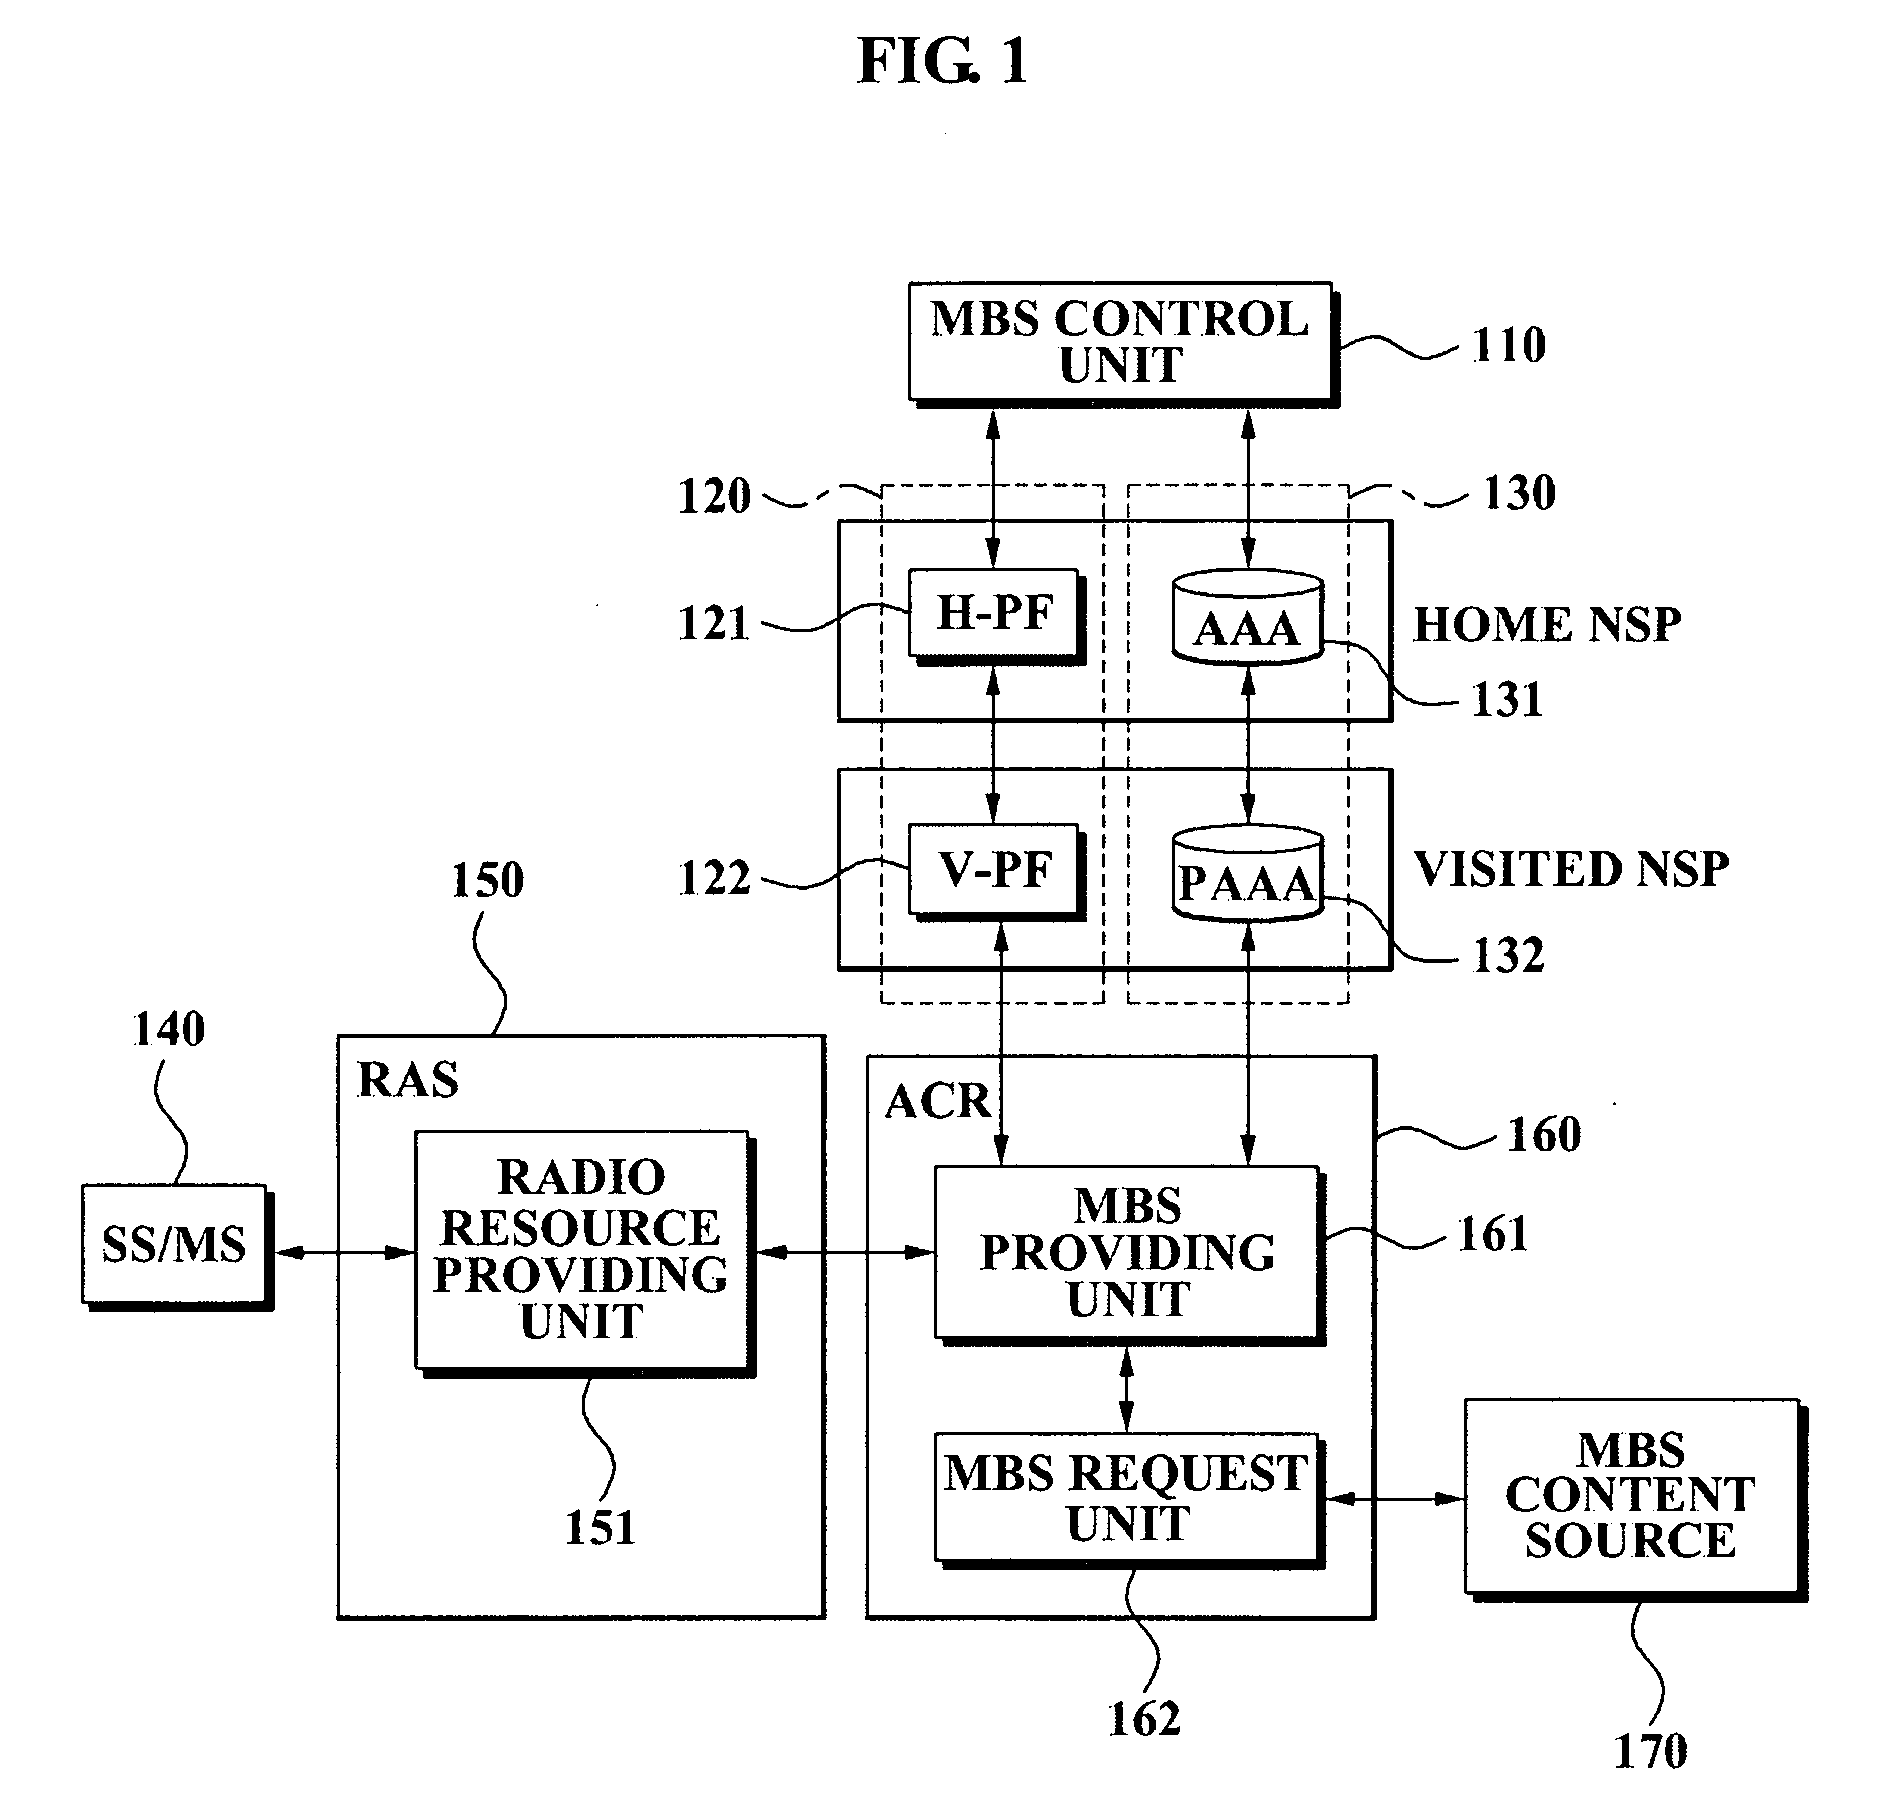 Method of providing multicast/broadcast service using wibro/wimax network and system using the method